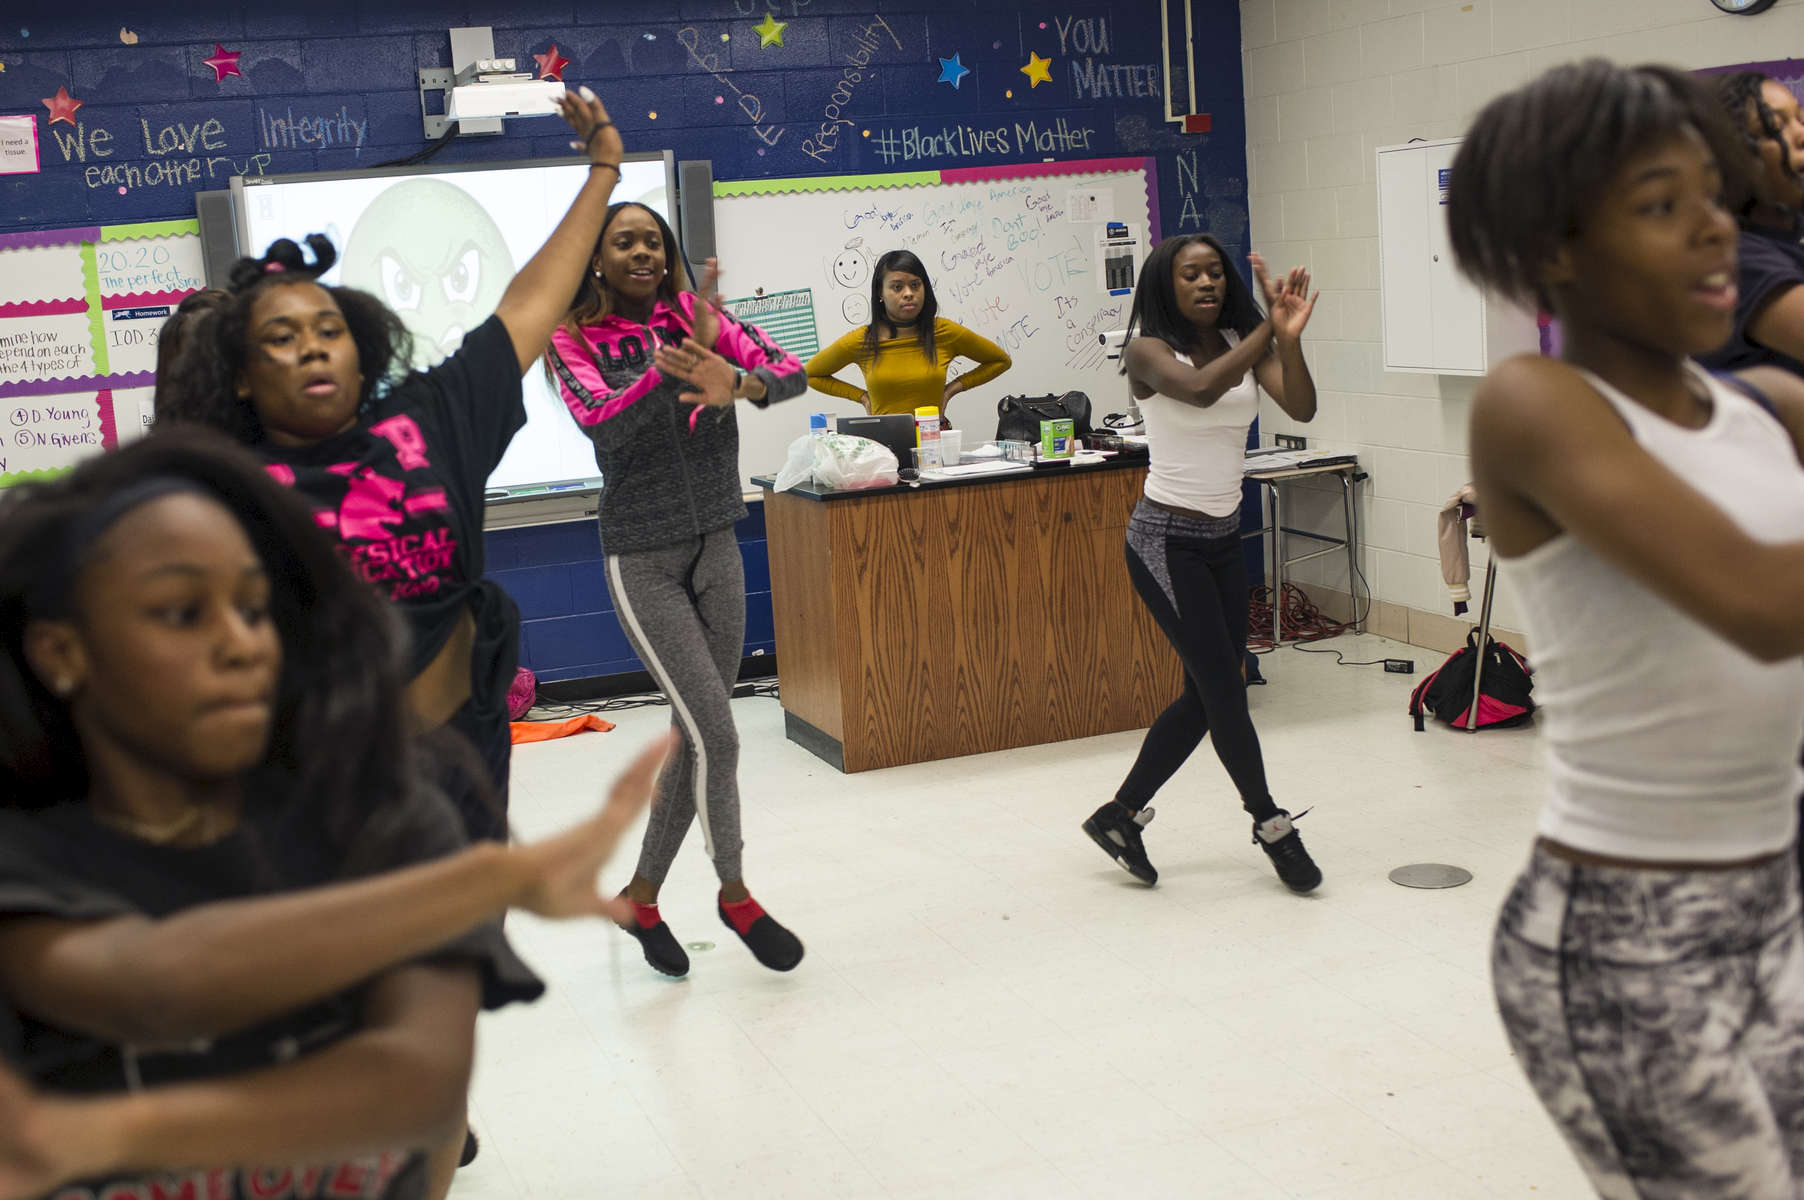 Biology teacher Kyera Bradley meets with the school's dance team in her room after school as they practice some routines at Noble Charter Schools - Johnson College Prep, November 8, 2016.